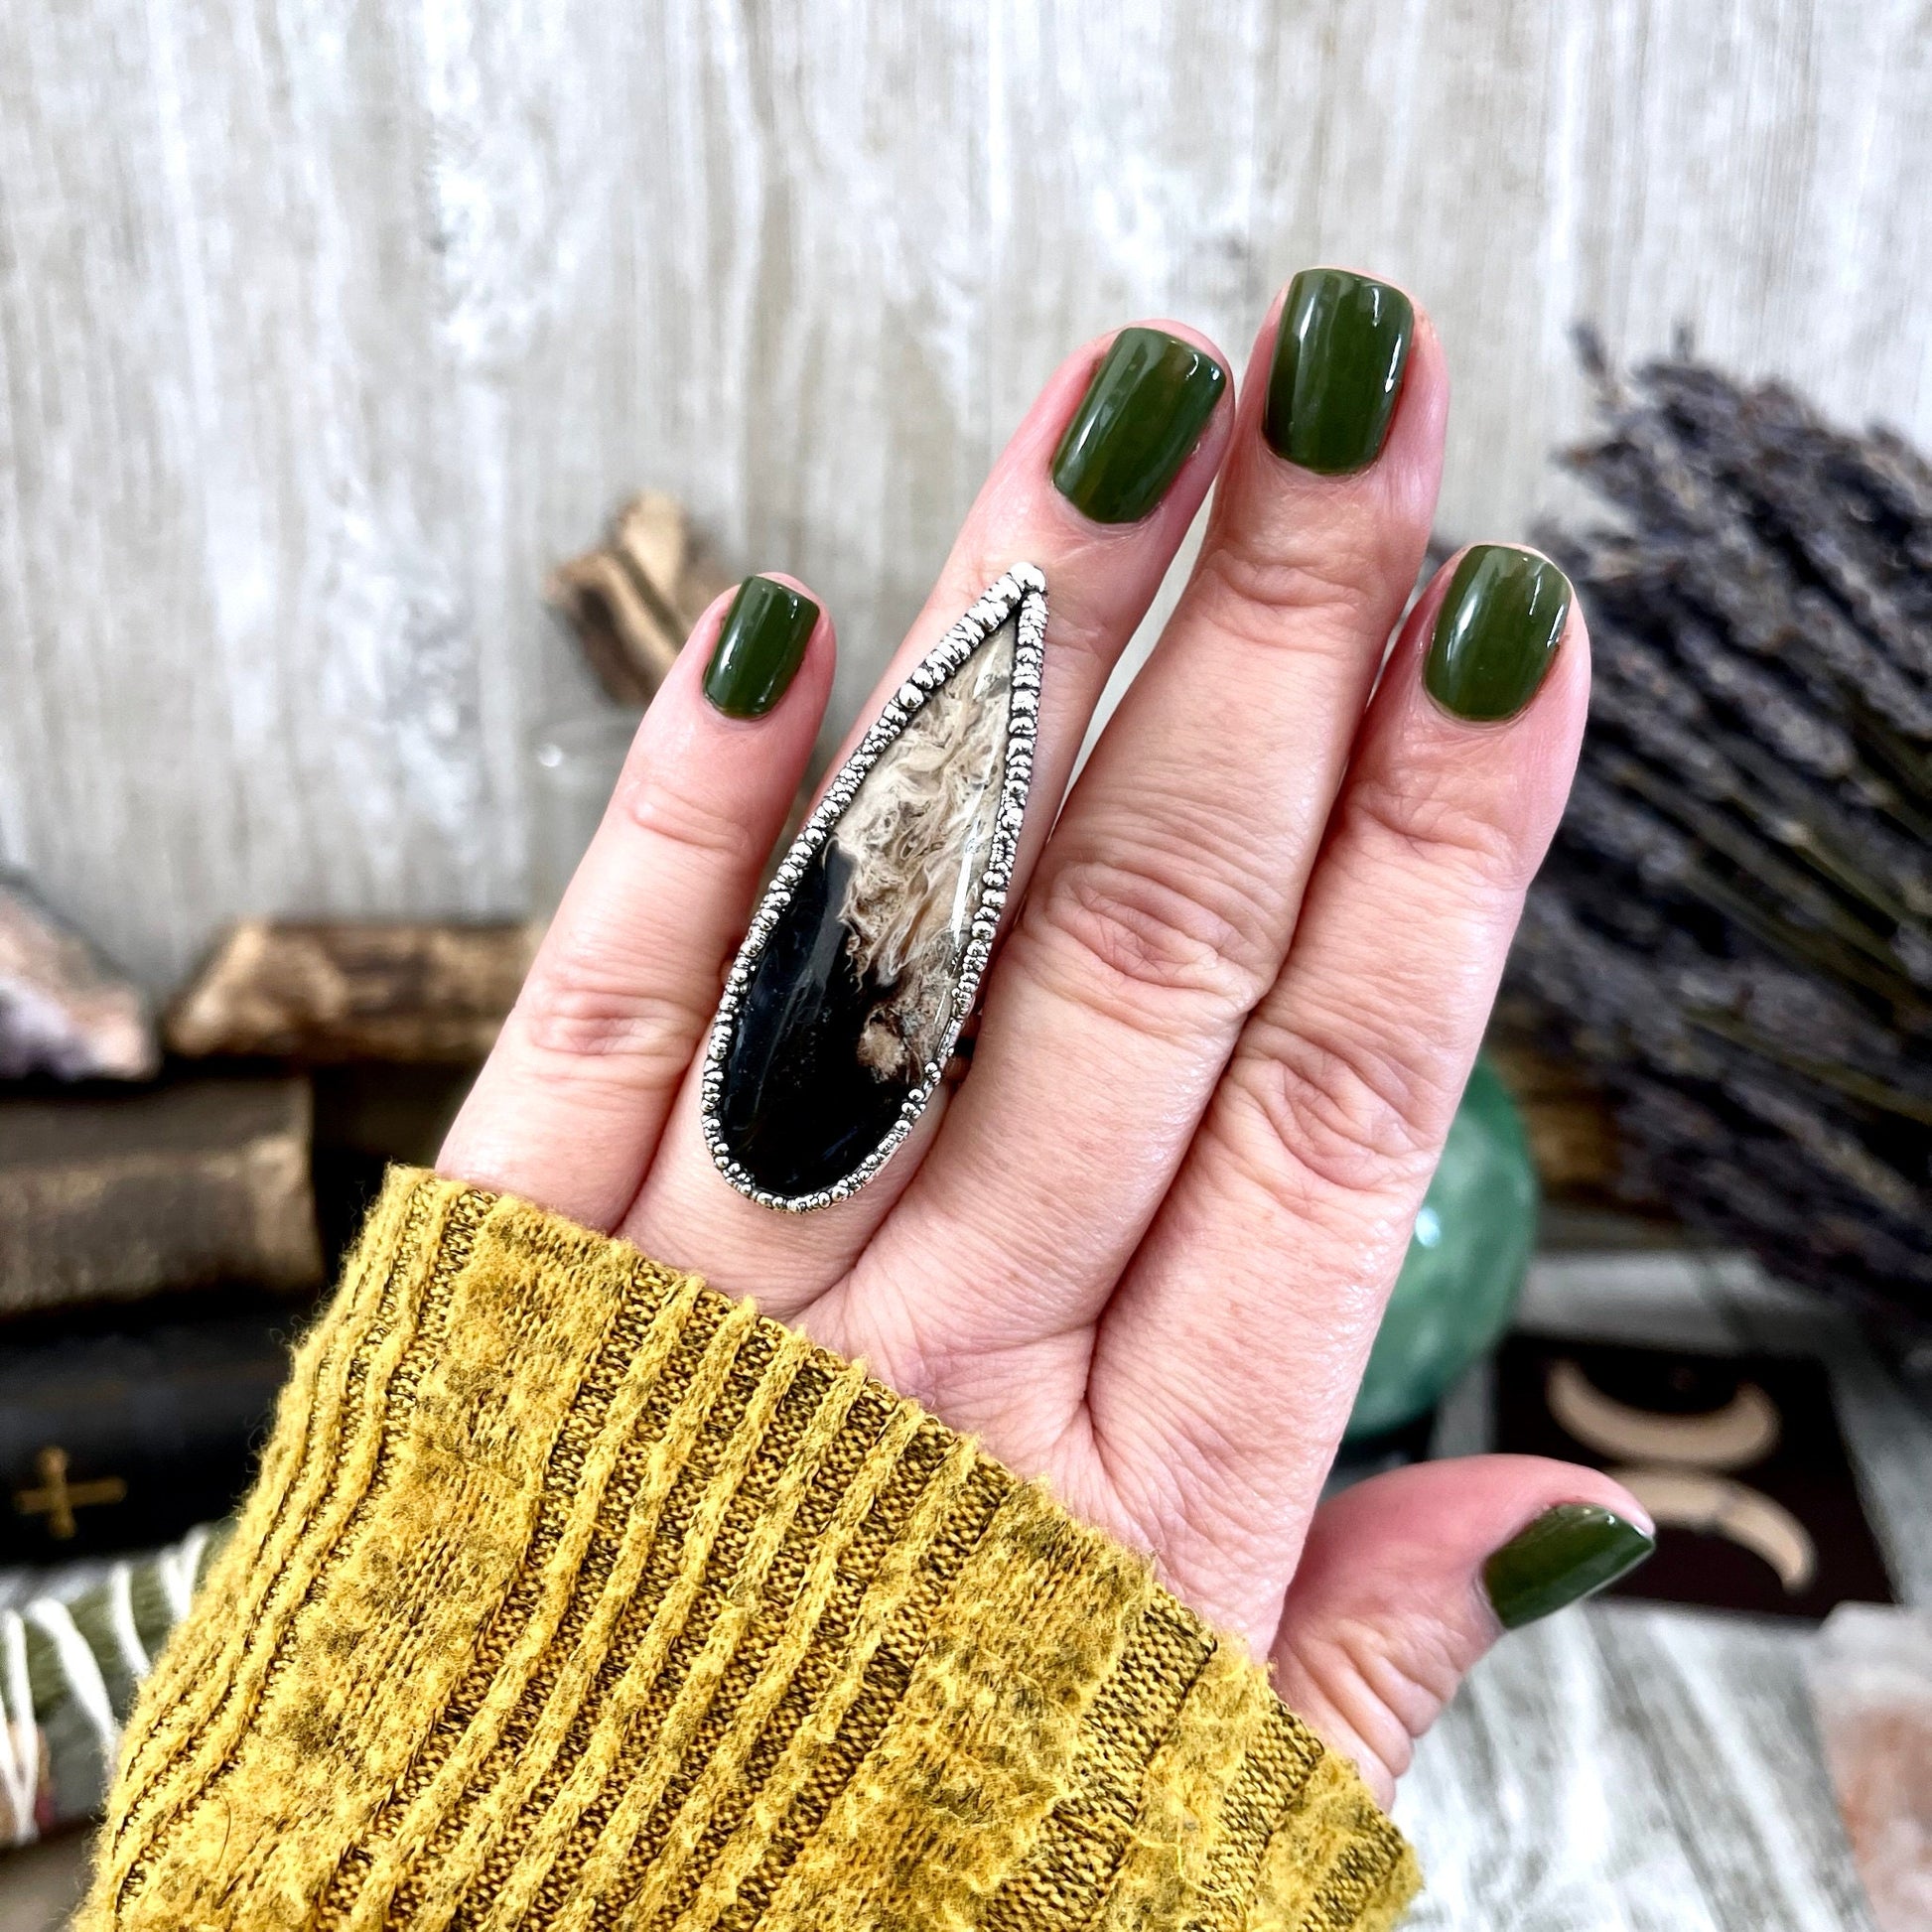 Big Bold Jewelry, Big Crystal Ring, Big Silver Ring, Big Stone Ring, Etsy ID: 1592184439, Fossilized Palm Root, FOXLARK- RINGS, Jewelry, Large Boho Ring, Large Crystal Ring, Large Stone Ring, Natural stone ring, Rings, silver crystal ring, Silver Stone Je